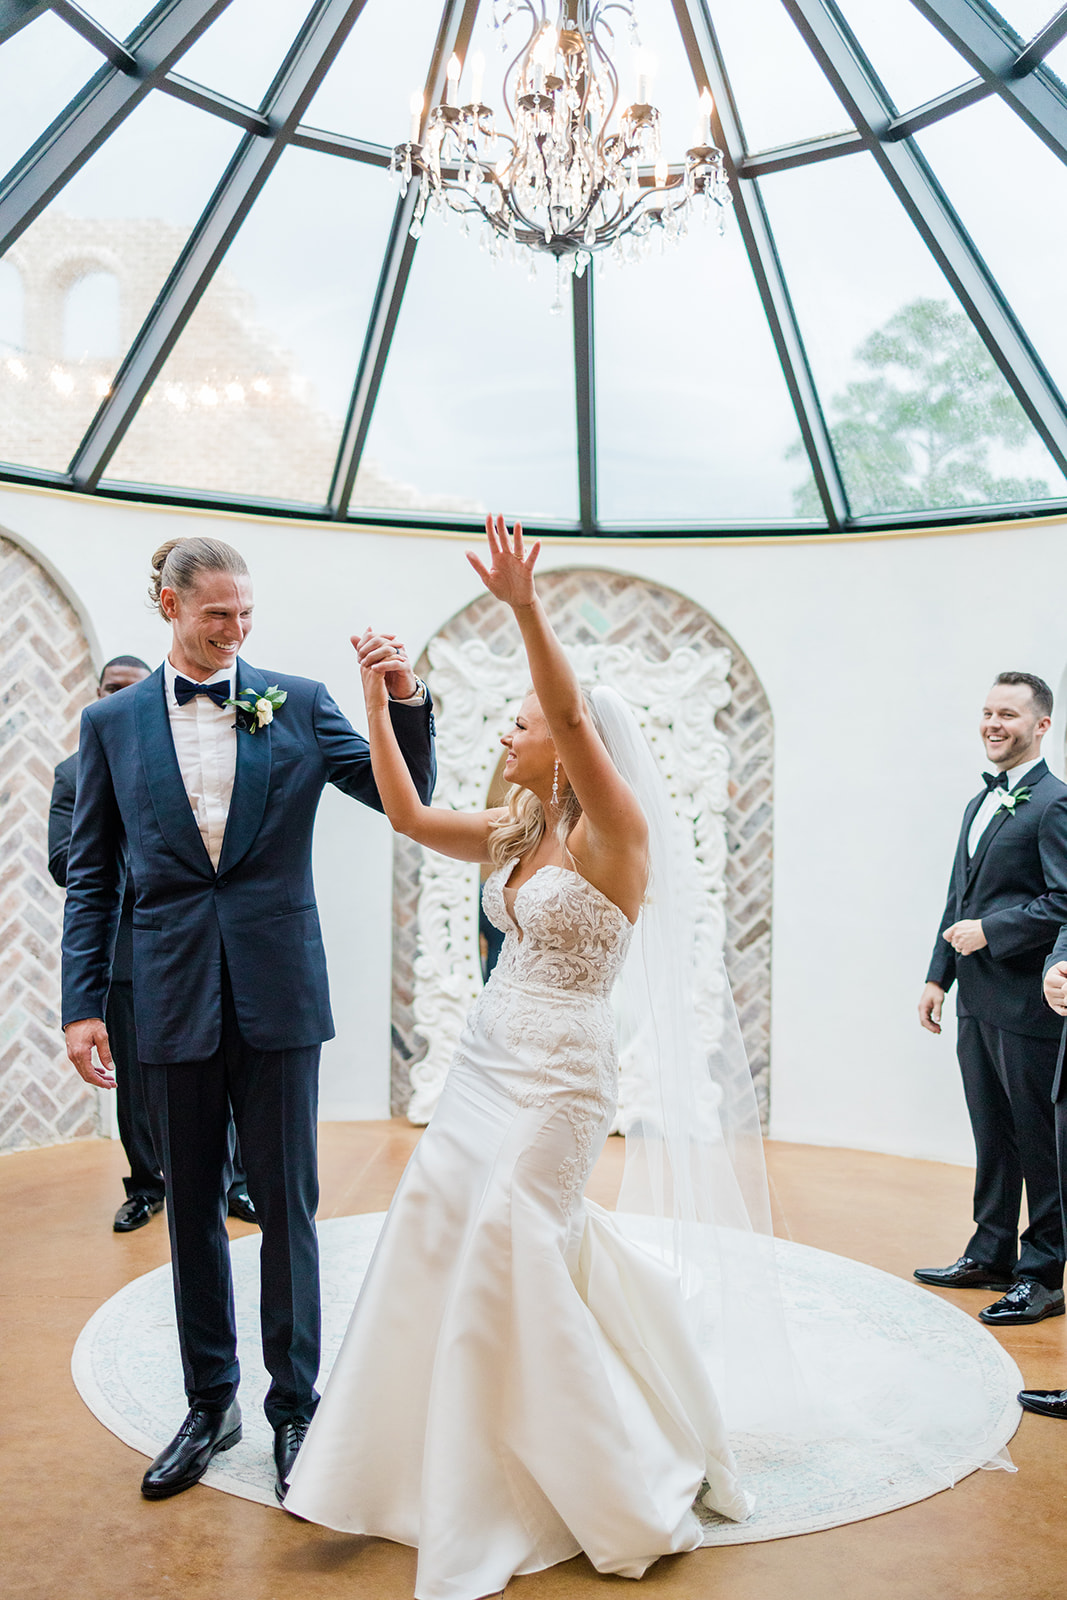 A Gorgeous Luxury Texas Wedding in the Summer: I am thrilled to share the magical love story of Meghan and Jordan as witnessed through my lens. I had the incredible honor of capturing their unforgettable day at Iron Manor in Montgomery, Texas.